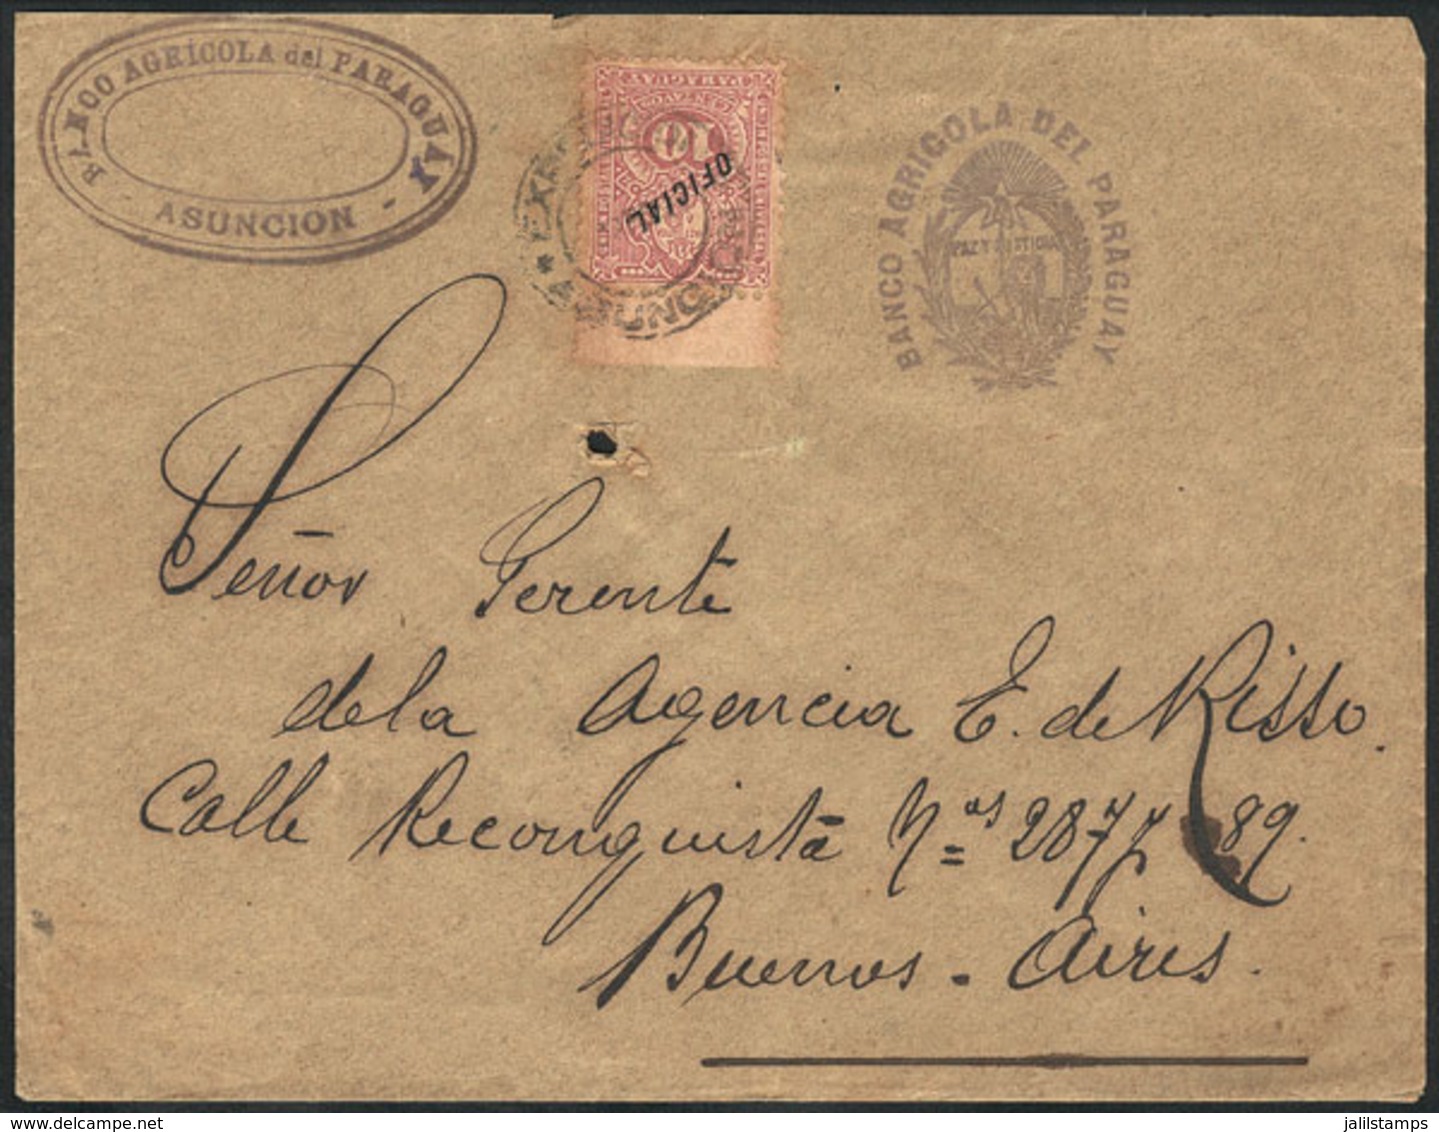 PARAGUAY: Official Cover Of The Banco Agrícola Del Paraguay, Franked With Official Stamp Of 10c. Lilac, Sent To Buenos A - Paraguay